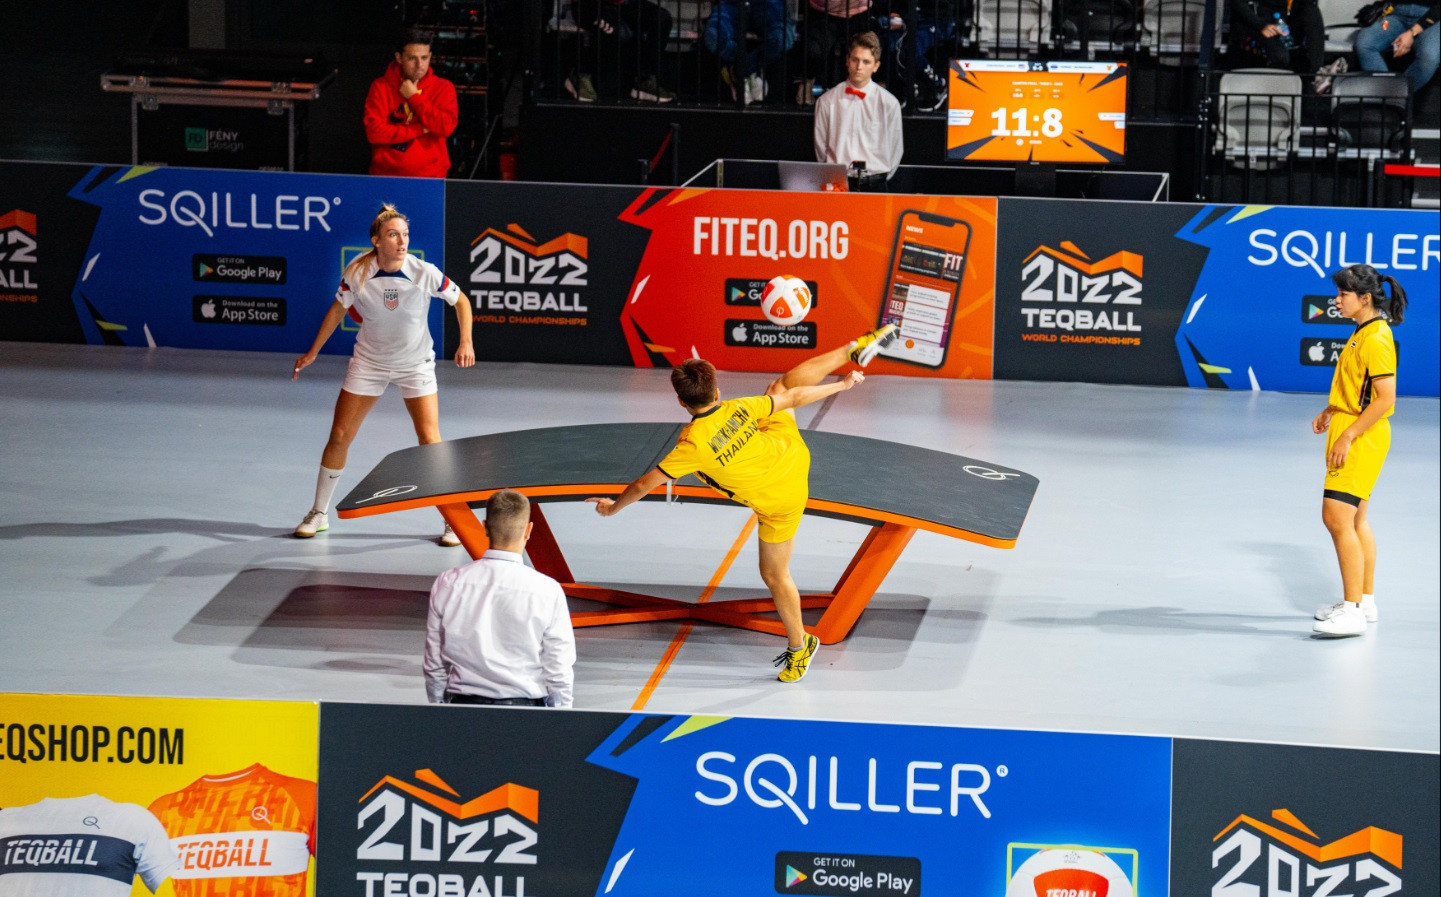 The fifth Teqball World Championships in Nuremberg proved a huge success for the sport ©FITEQ